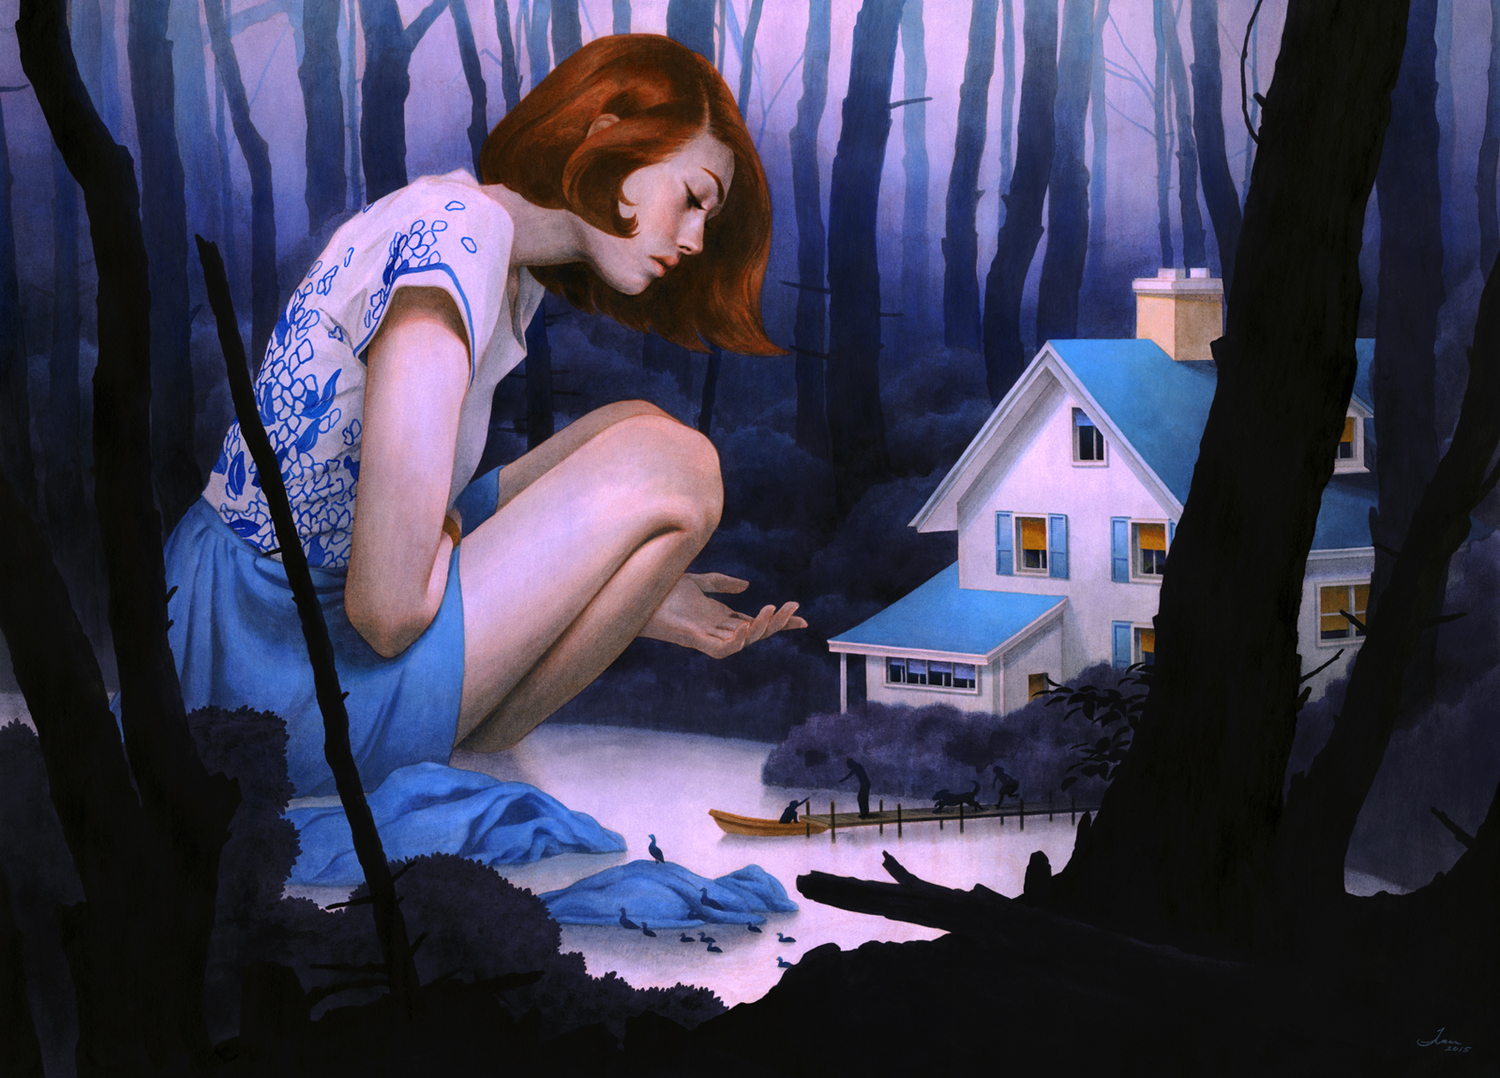 Paintings by Tran Nguyen 